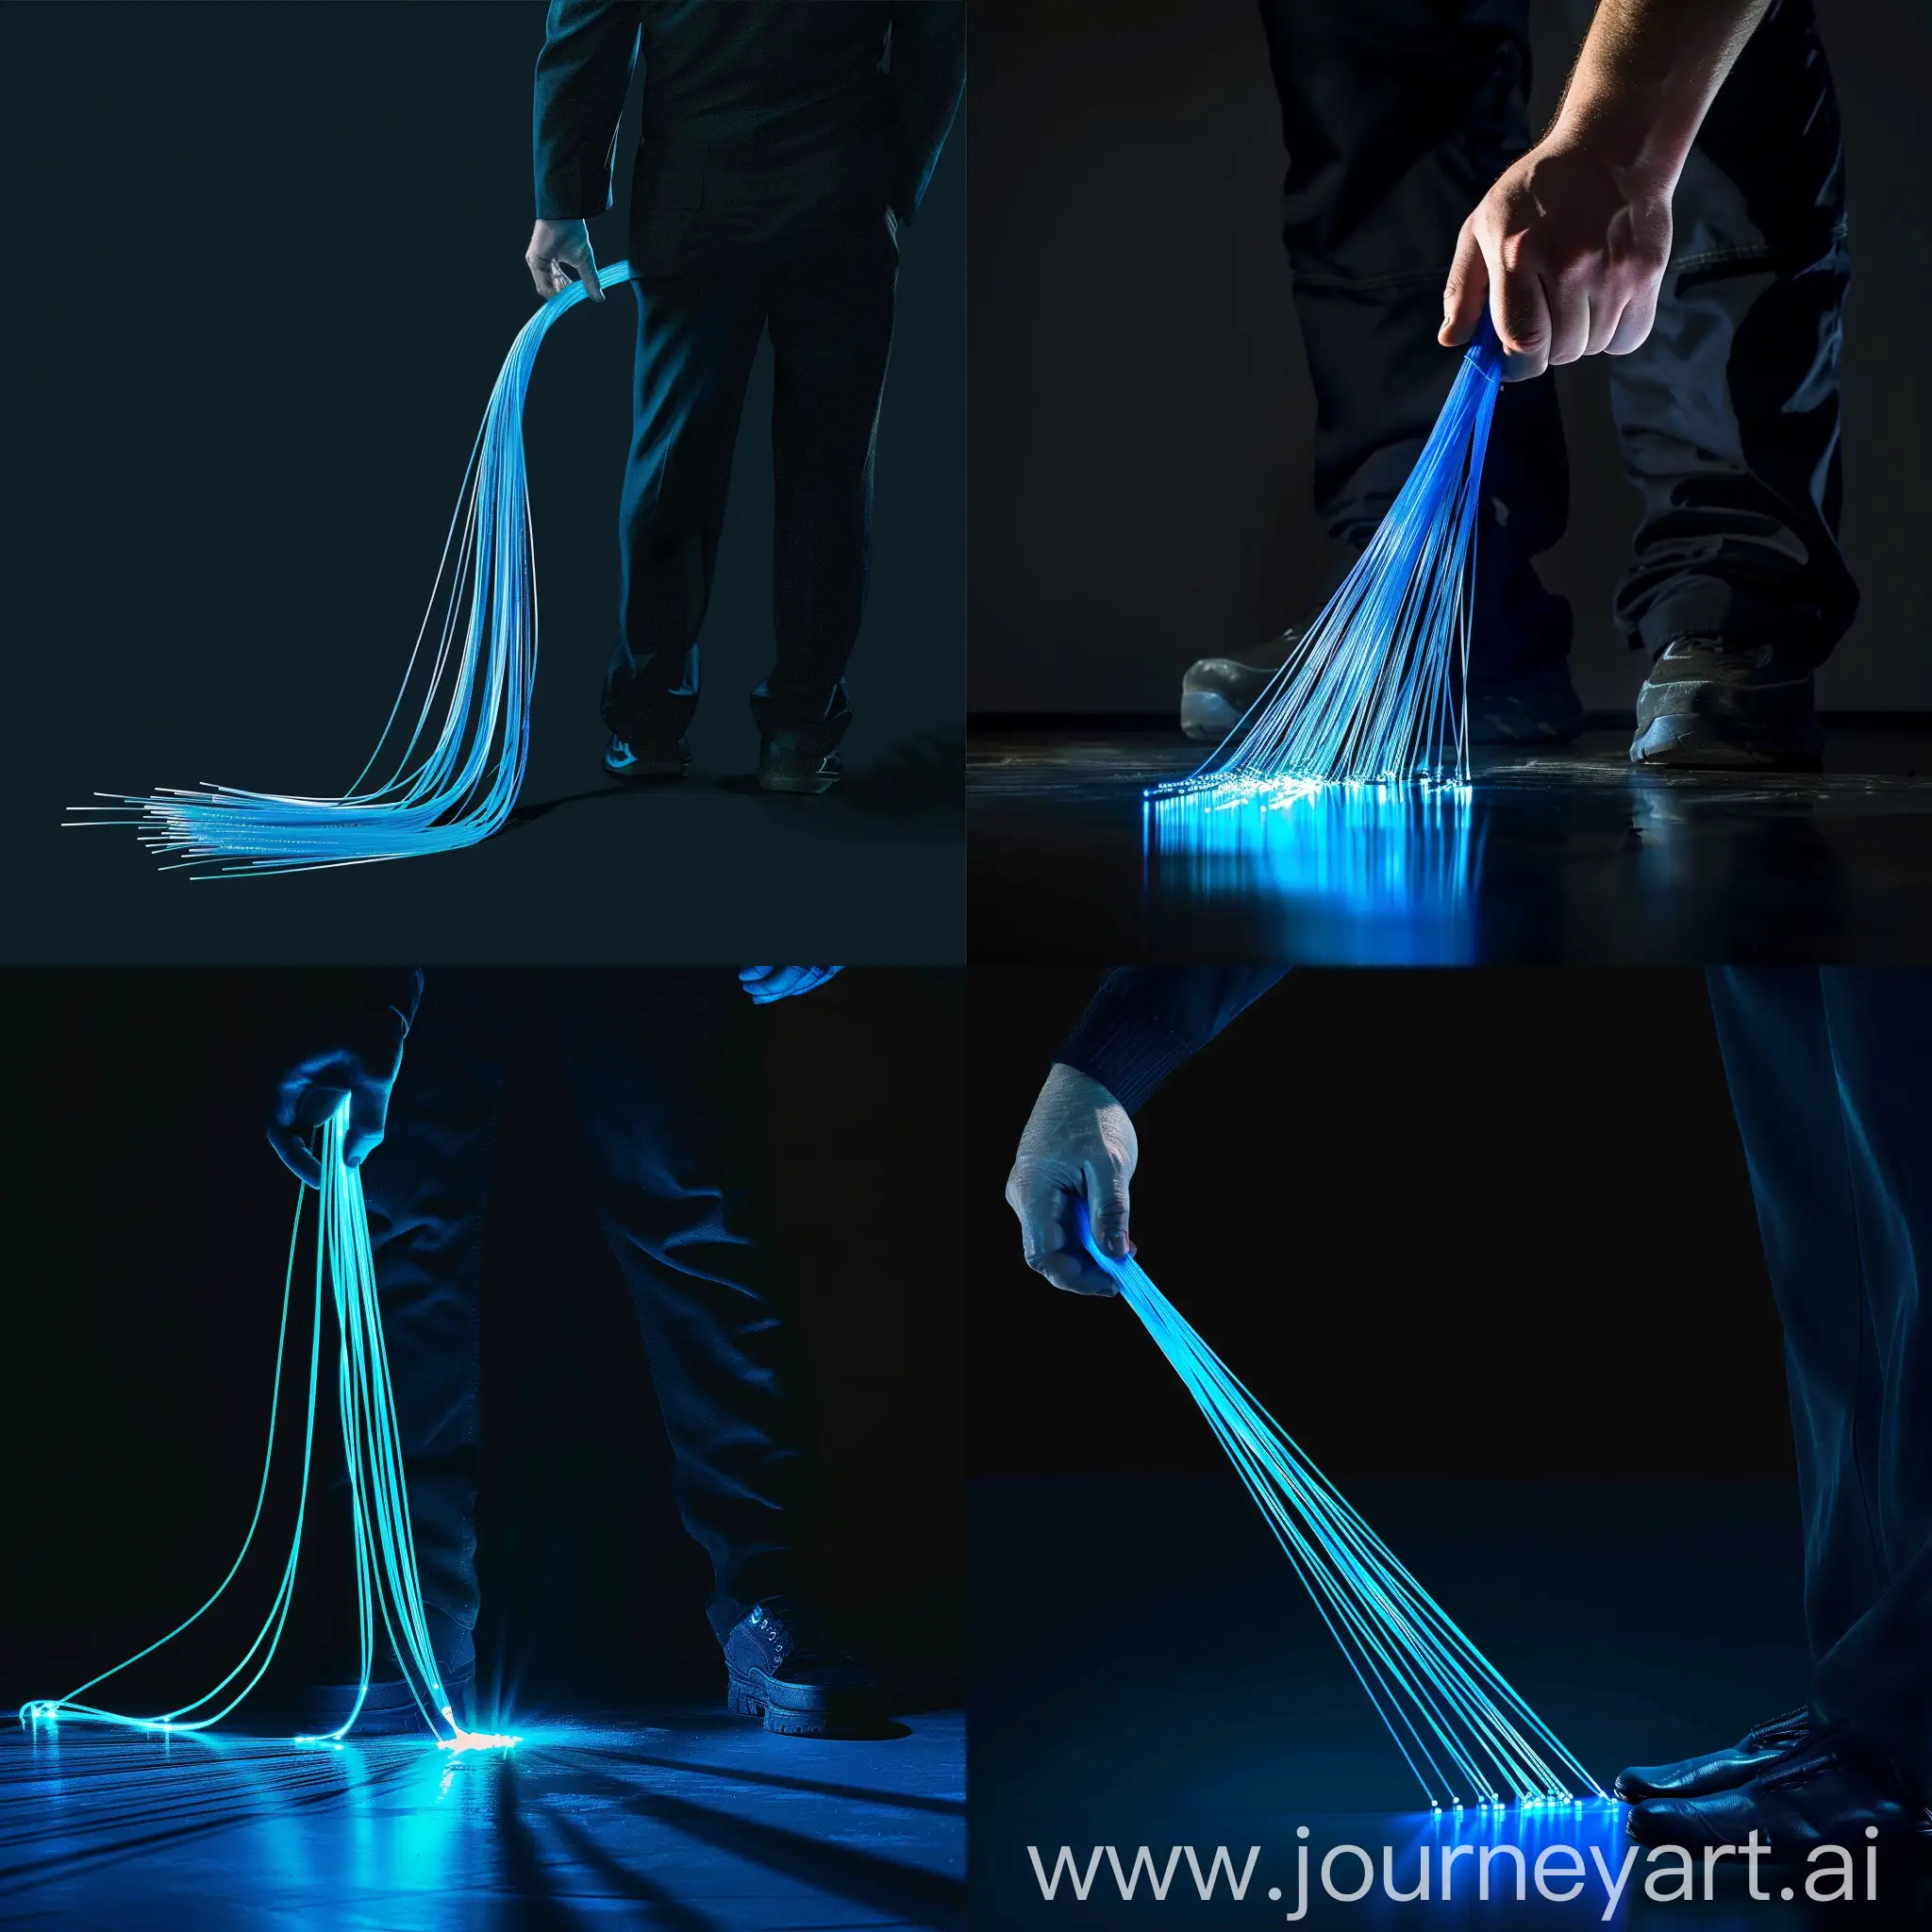 a man from the head to the feet, holds a blue optic fiber cable, that goes from his hand to the floor. It should be realistic